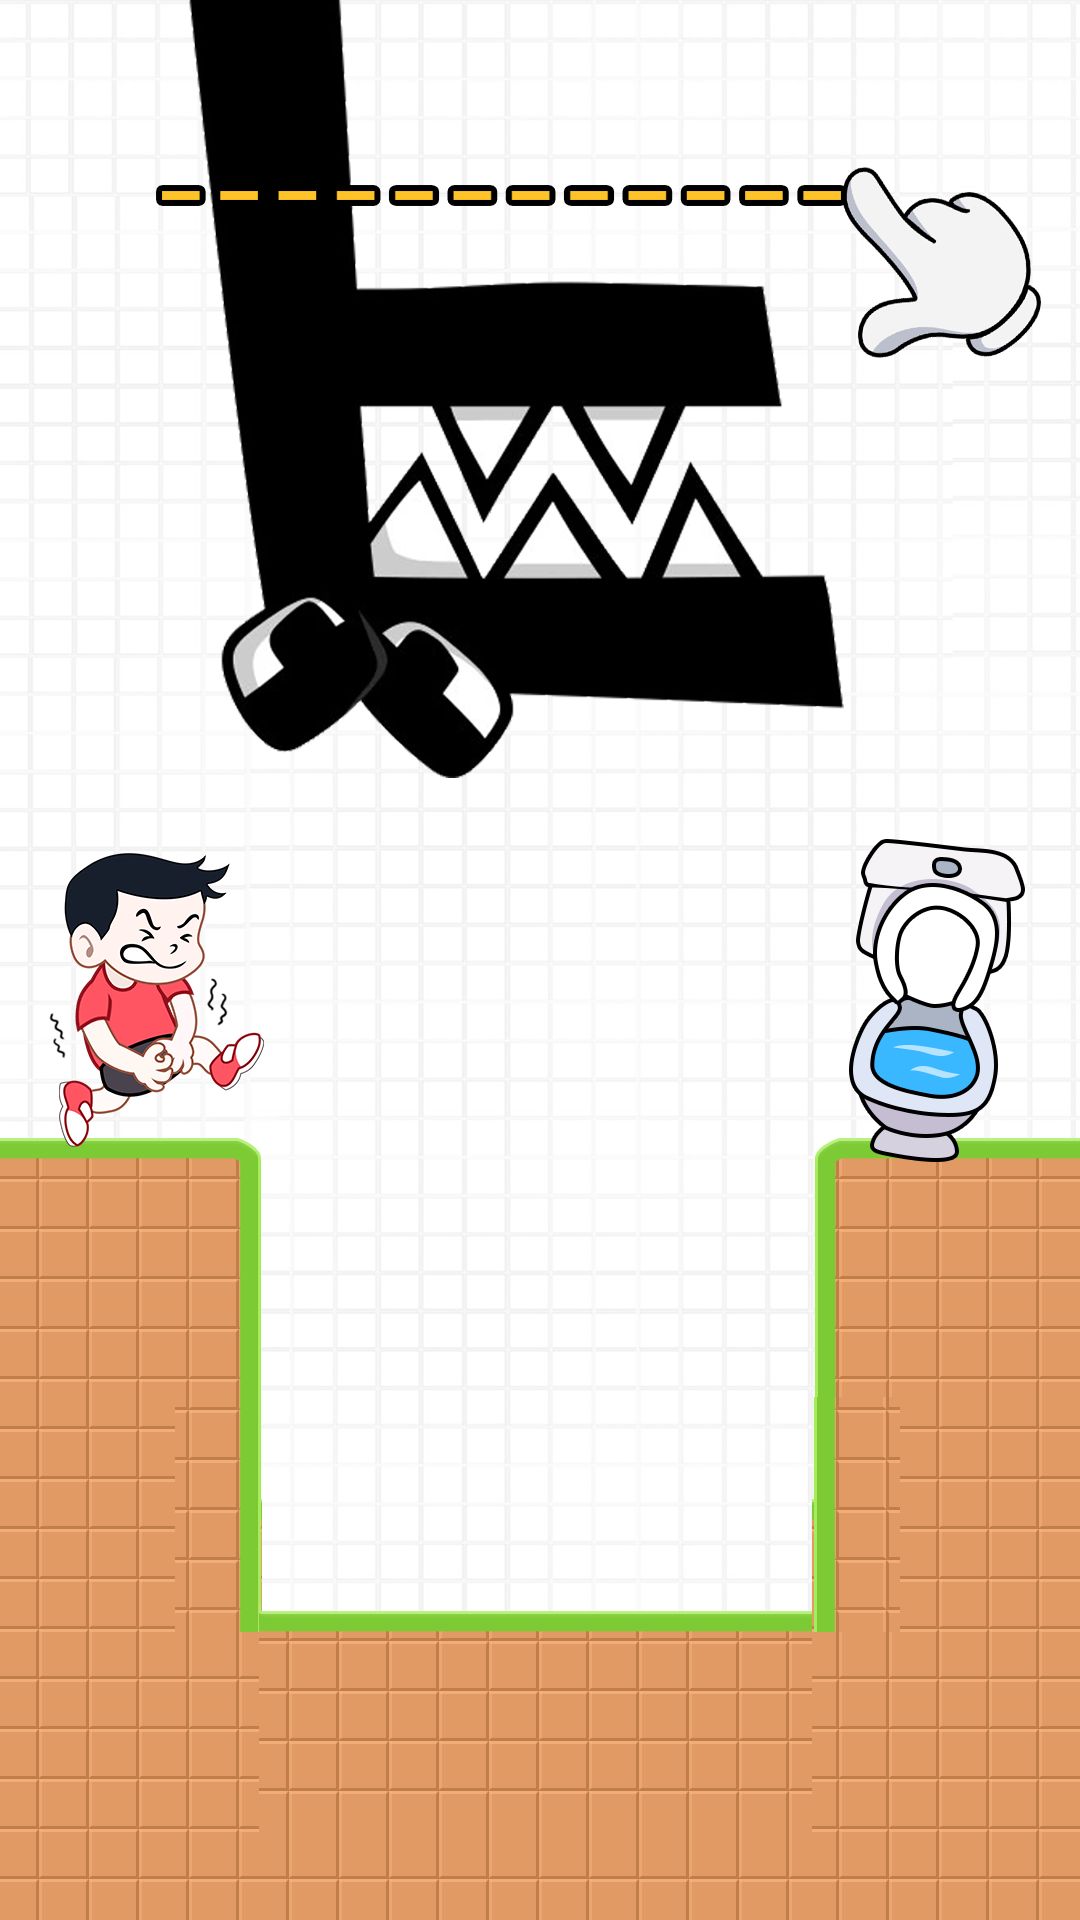 Gameplay of the Toilet Run: Bridge Slice for Android phone or tablet.